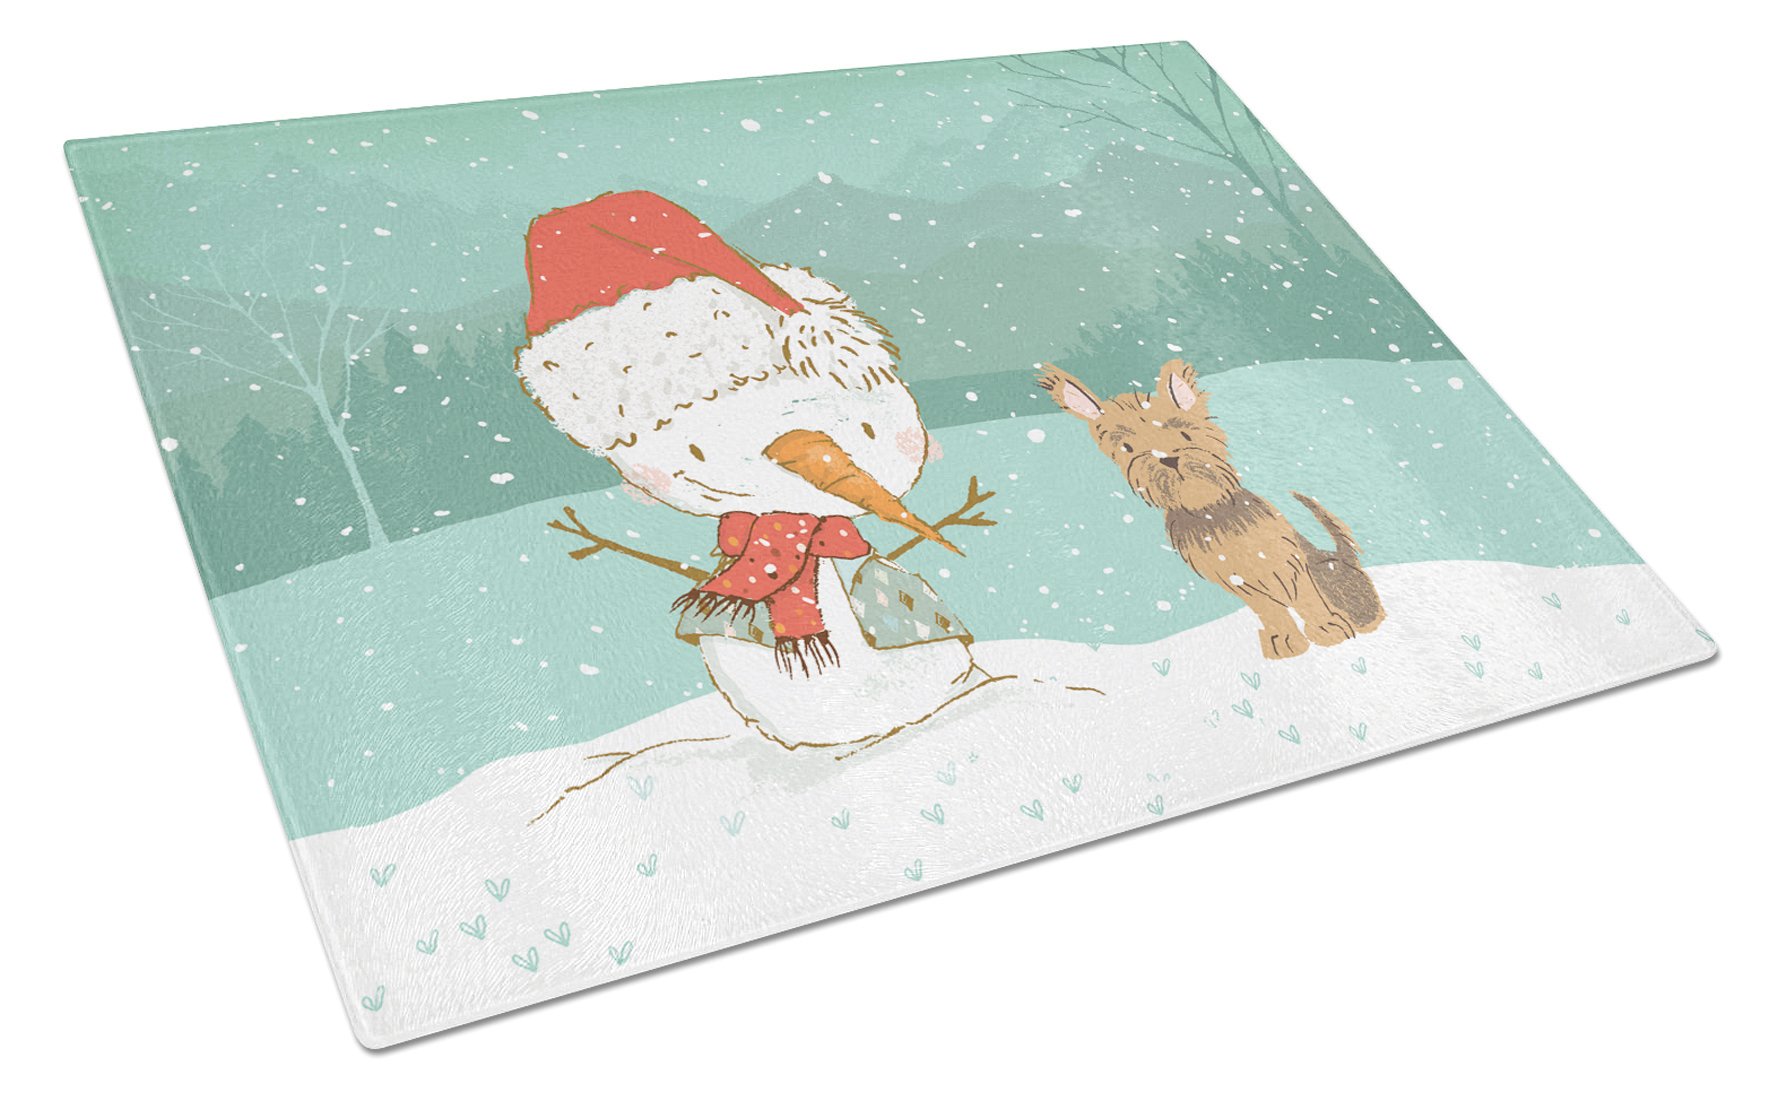 Yorkie Cropped Ears Snowman Christmas Glass Cutting Board Large CK2098LCB by Caroline's Treasures